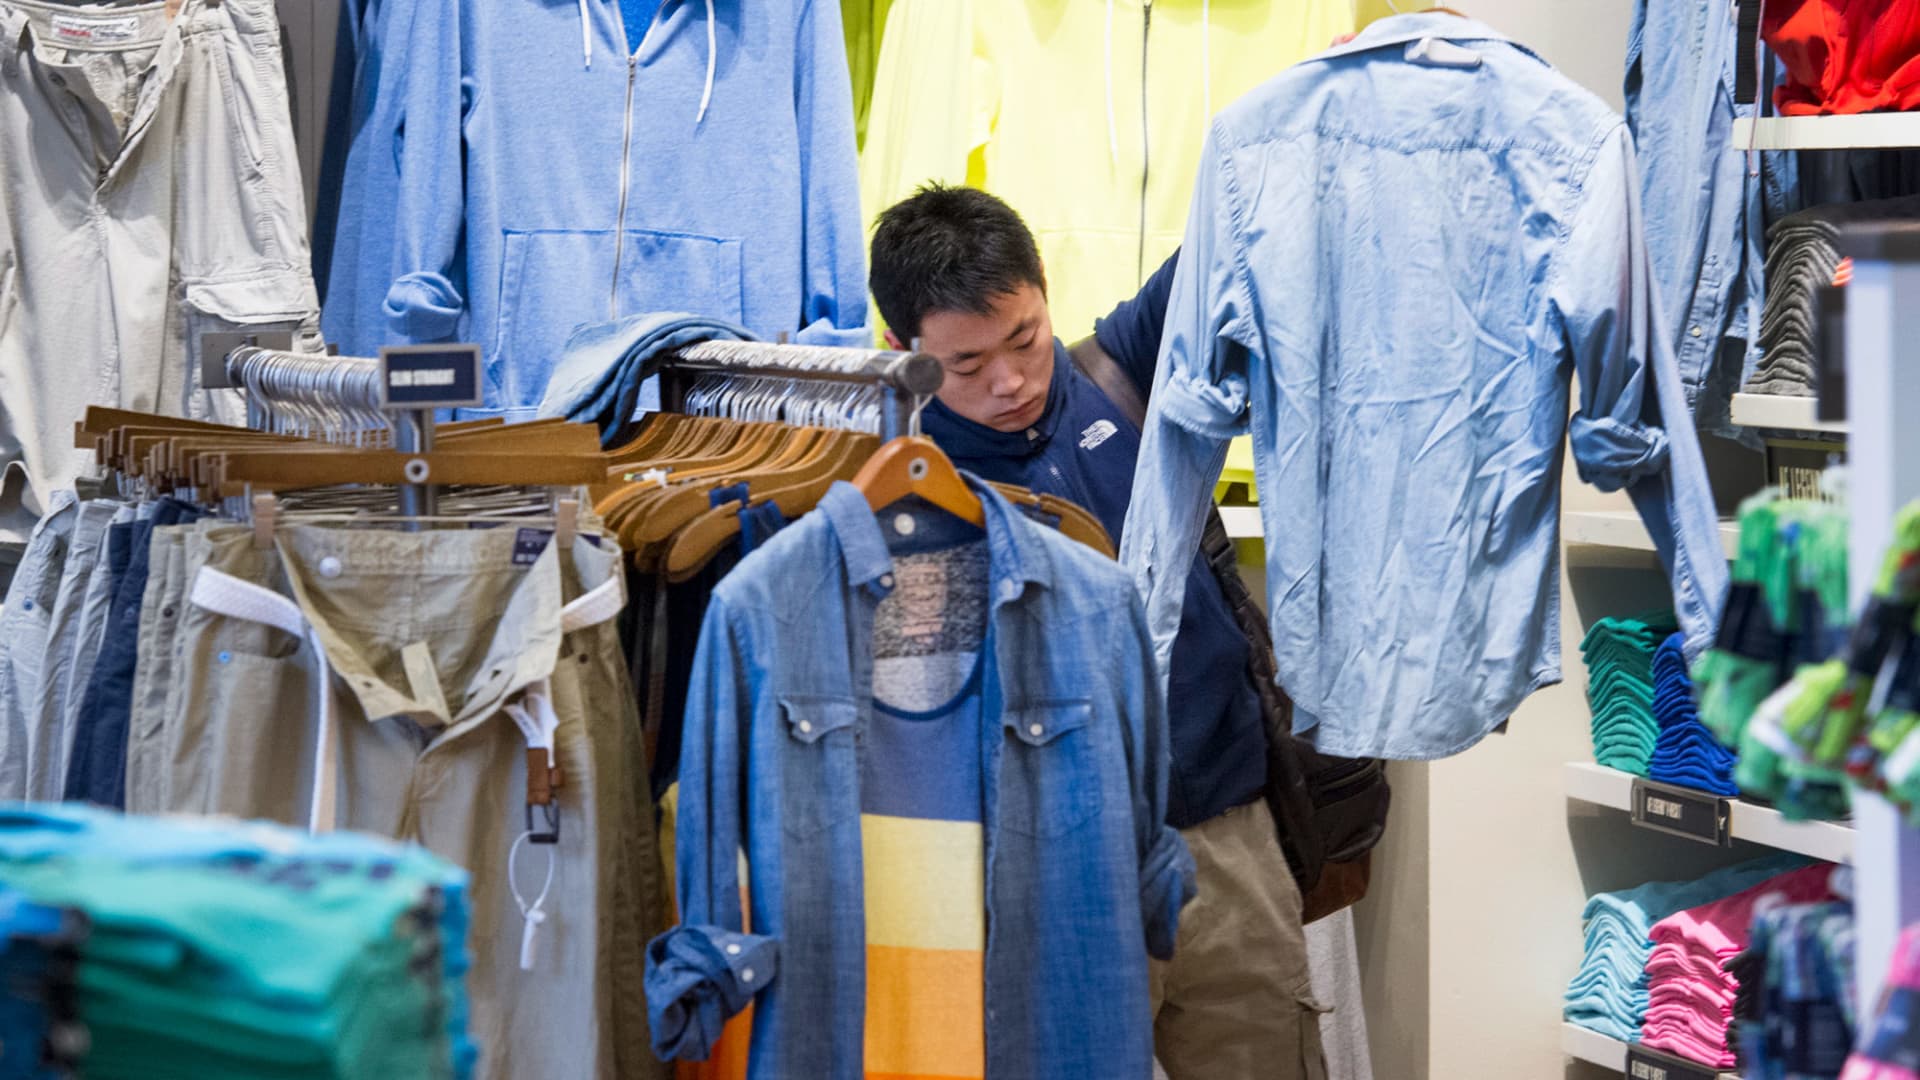 Clothes are expensive even as retailers try to clear inventory